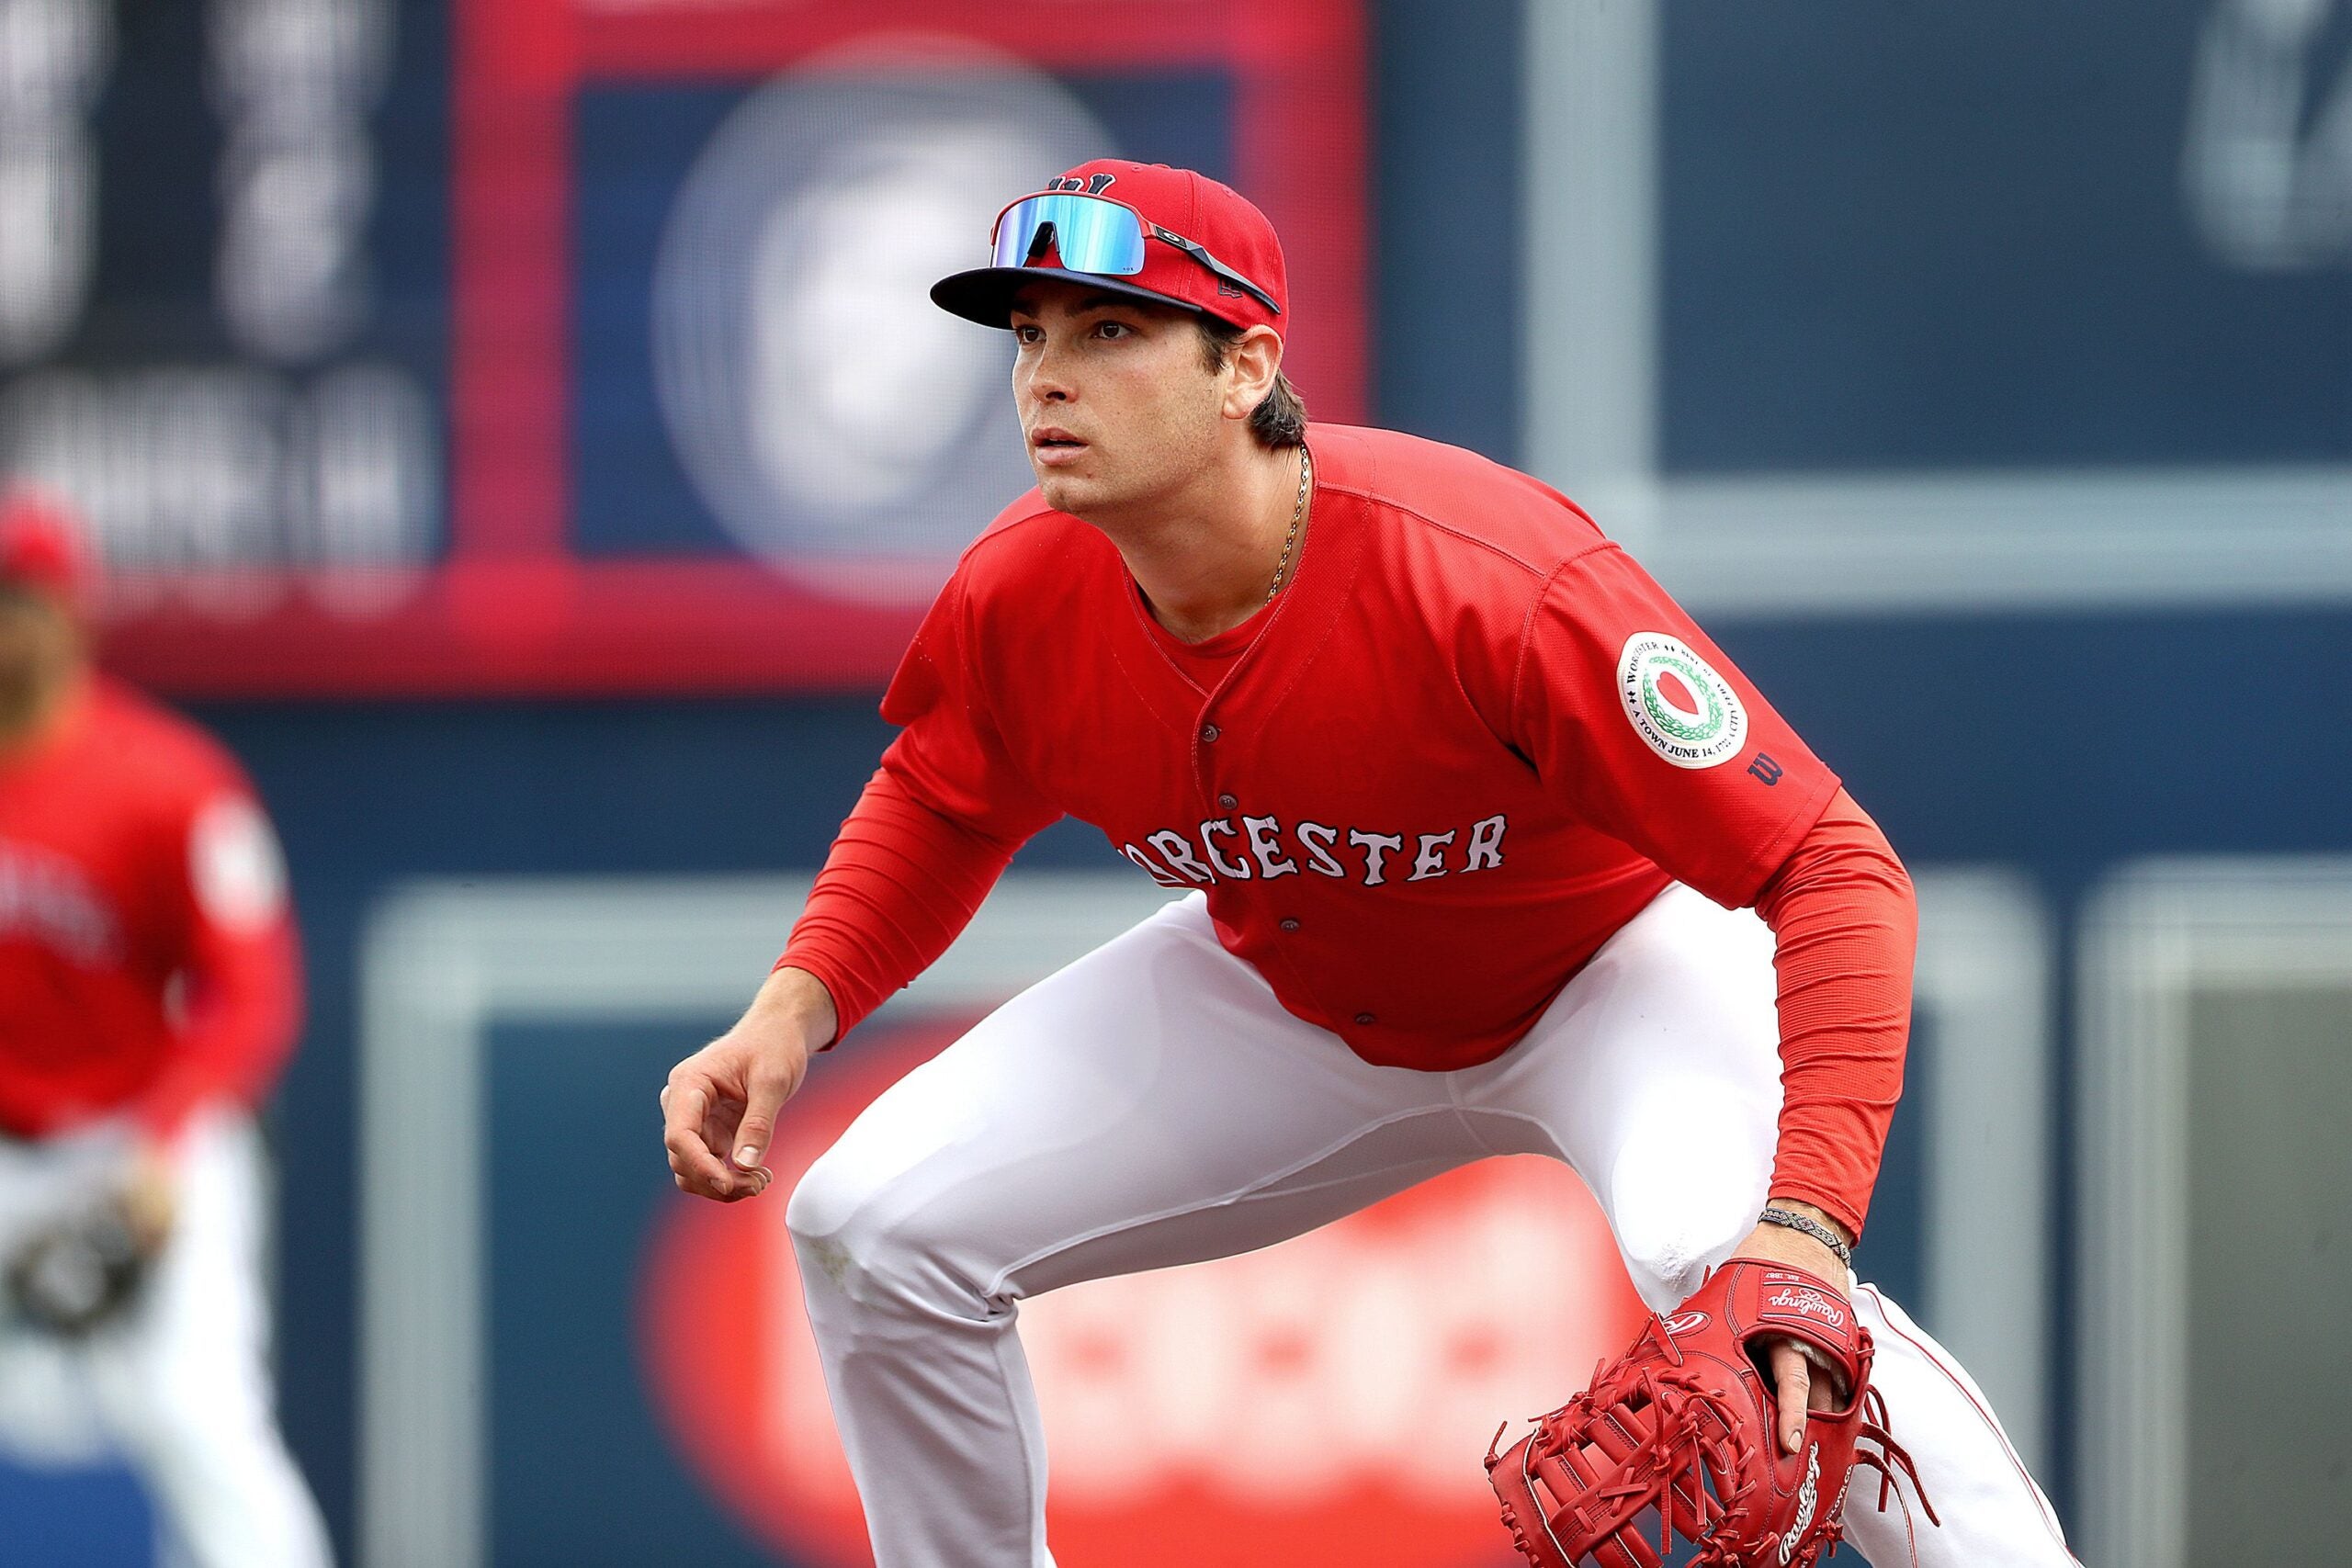 Triston Casas' viral Little League photos have Red Sox Twitter going nuts